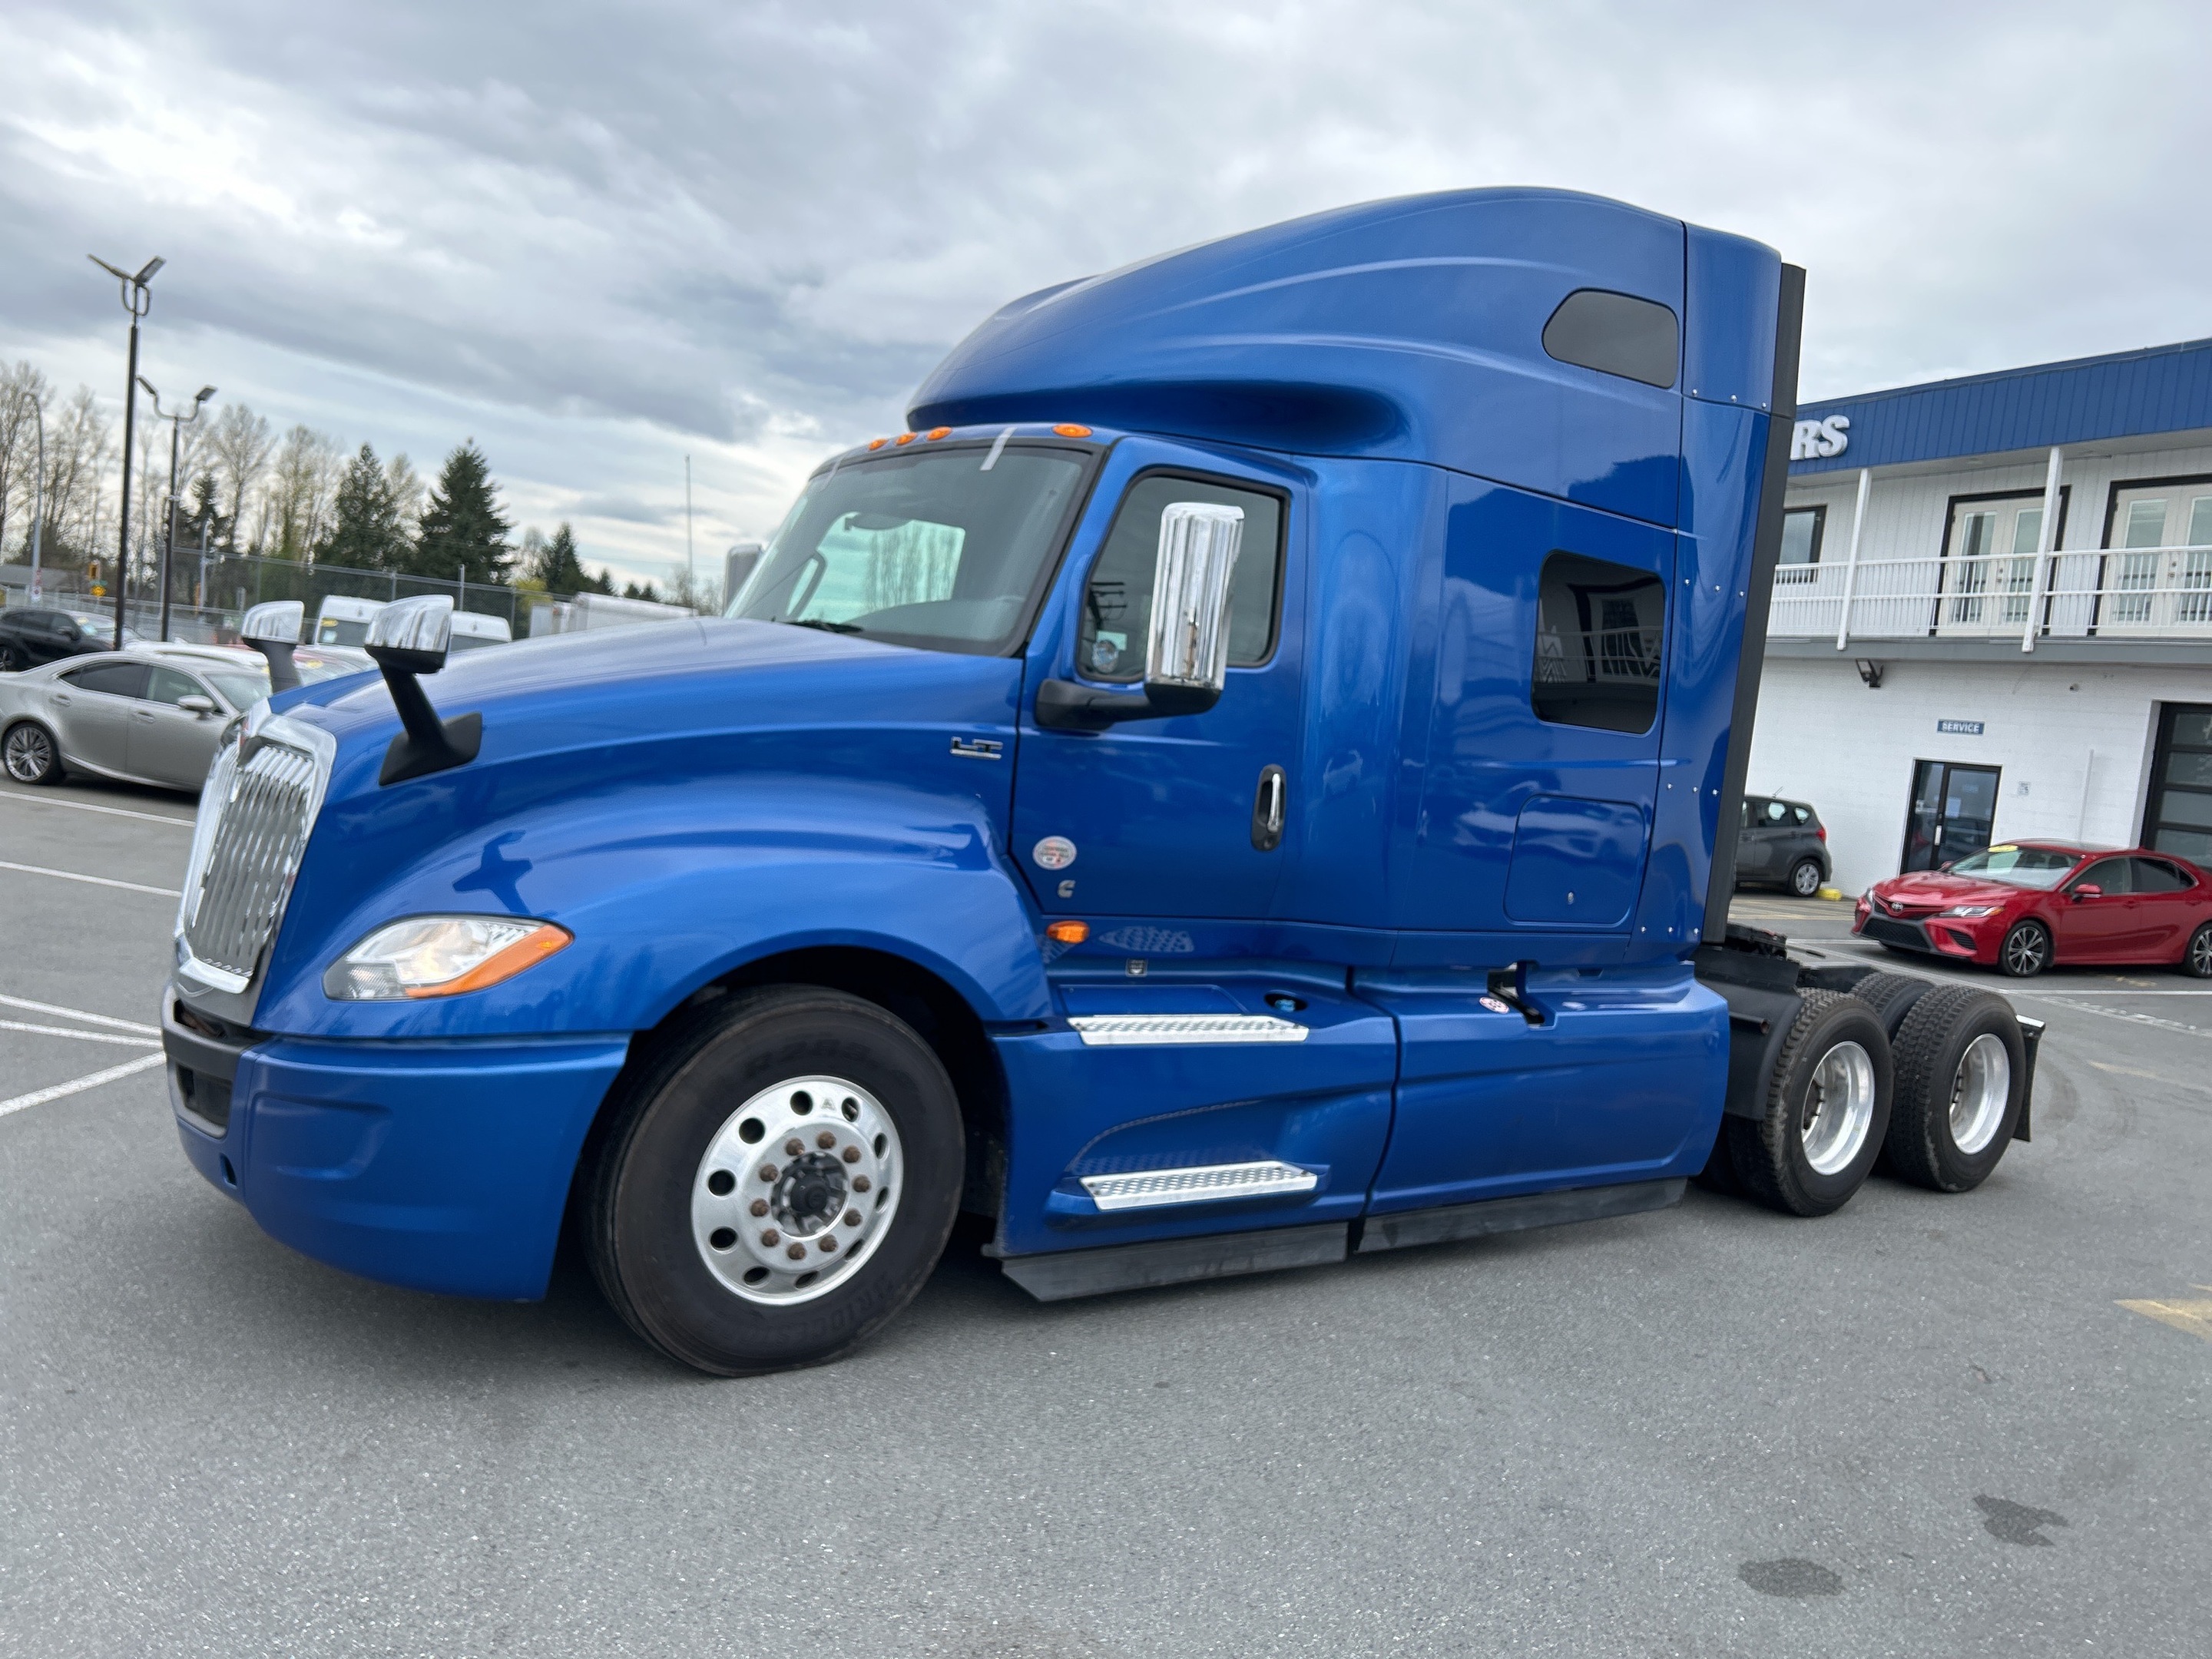 2019 International LT625 MVI COMPLETED + LEASING AVAILABLE